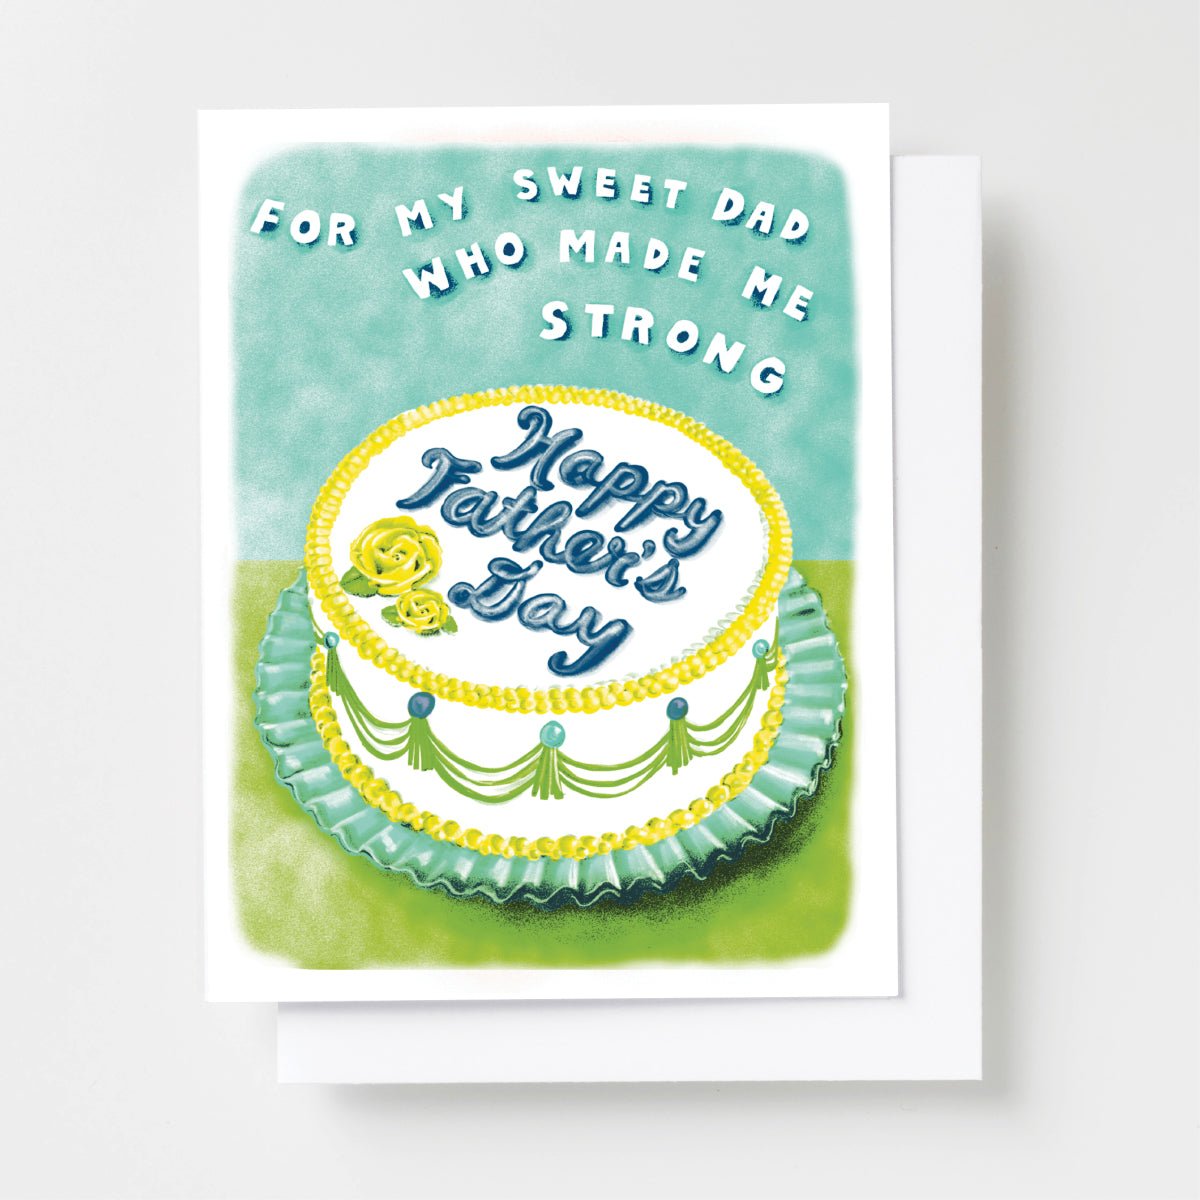 Sweet Dad Risograph Card - Yellow Owl Workshop